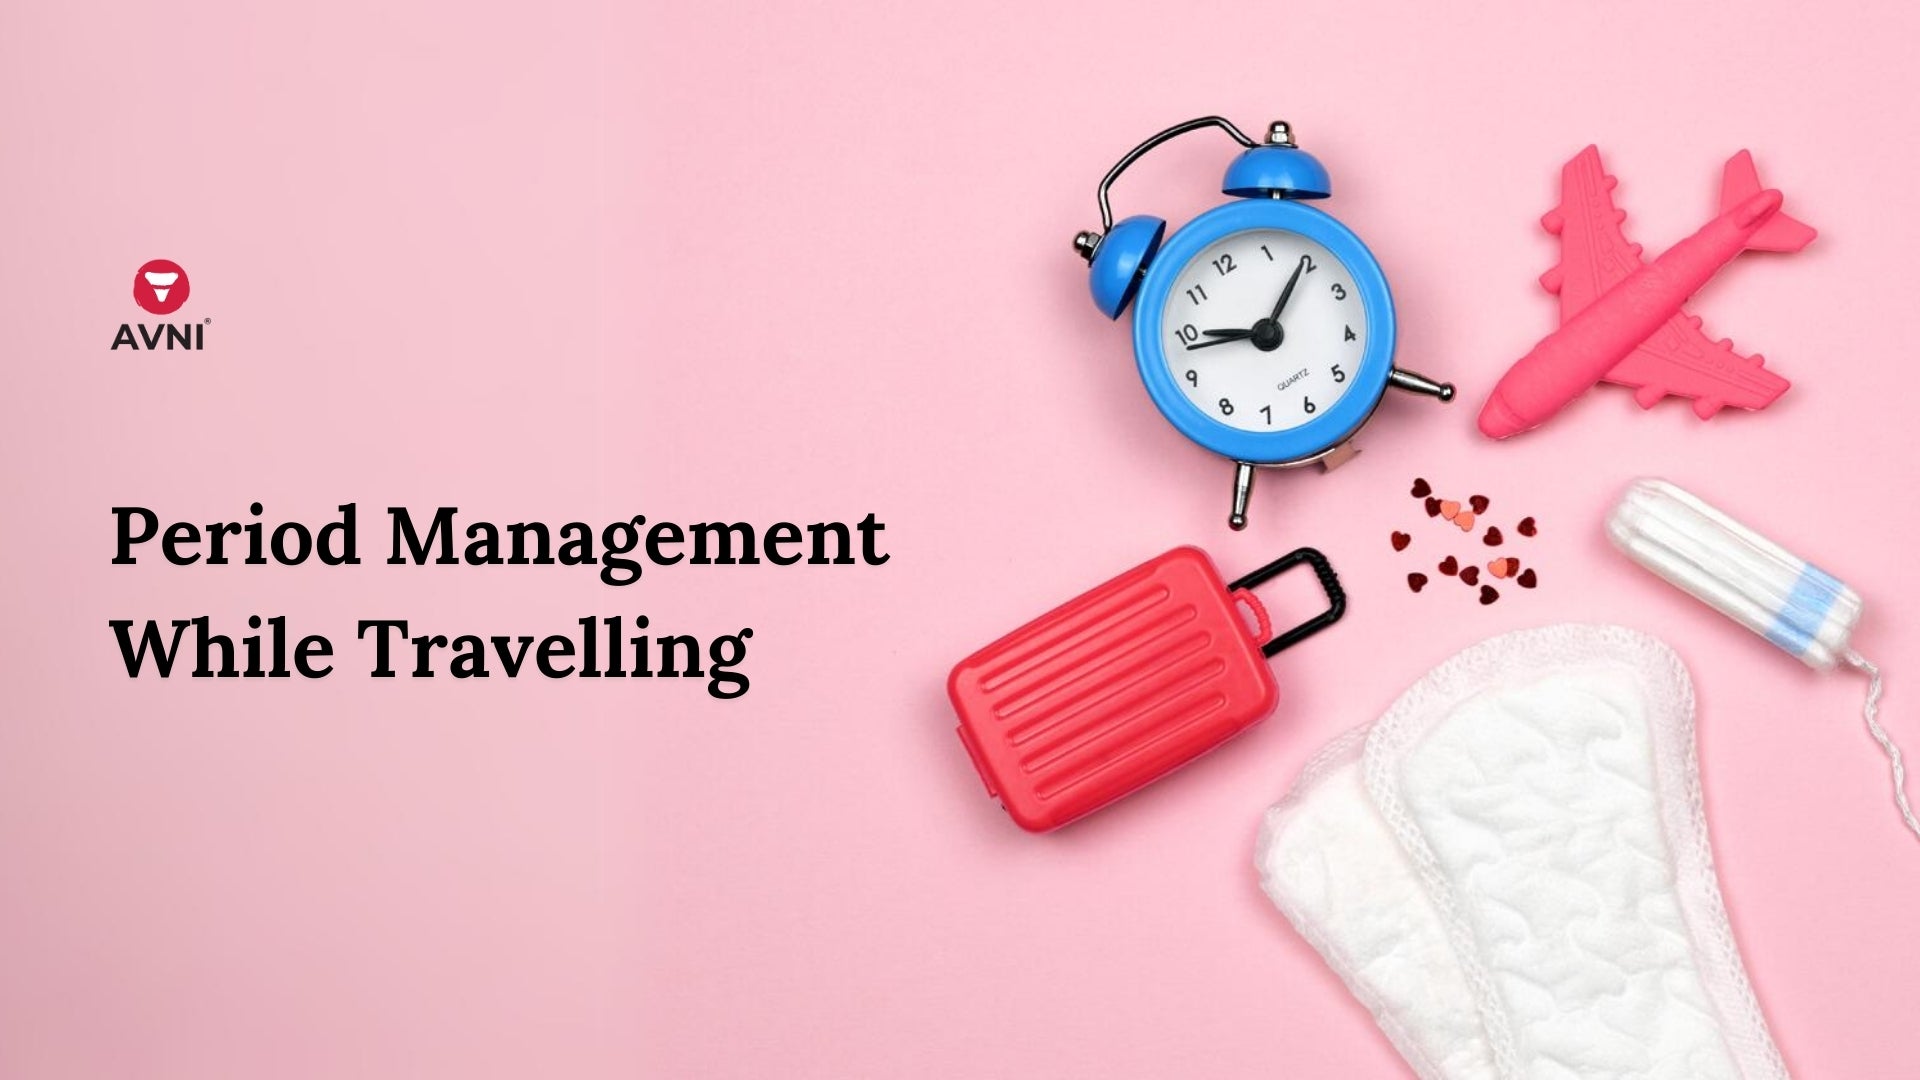 Period Management While Travelling